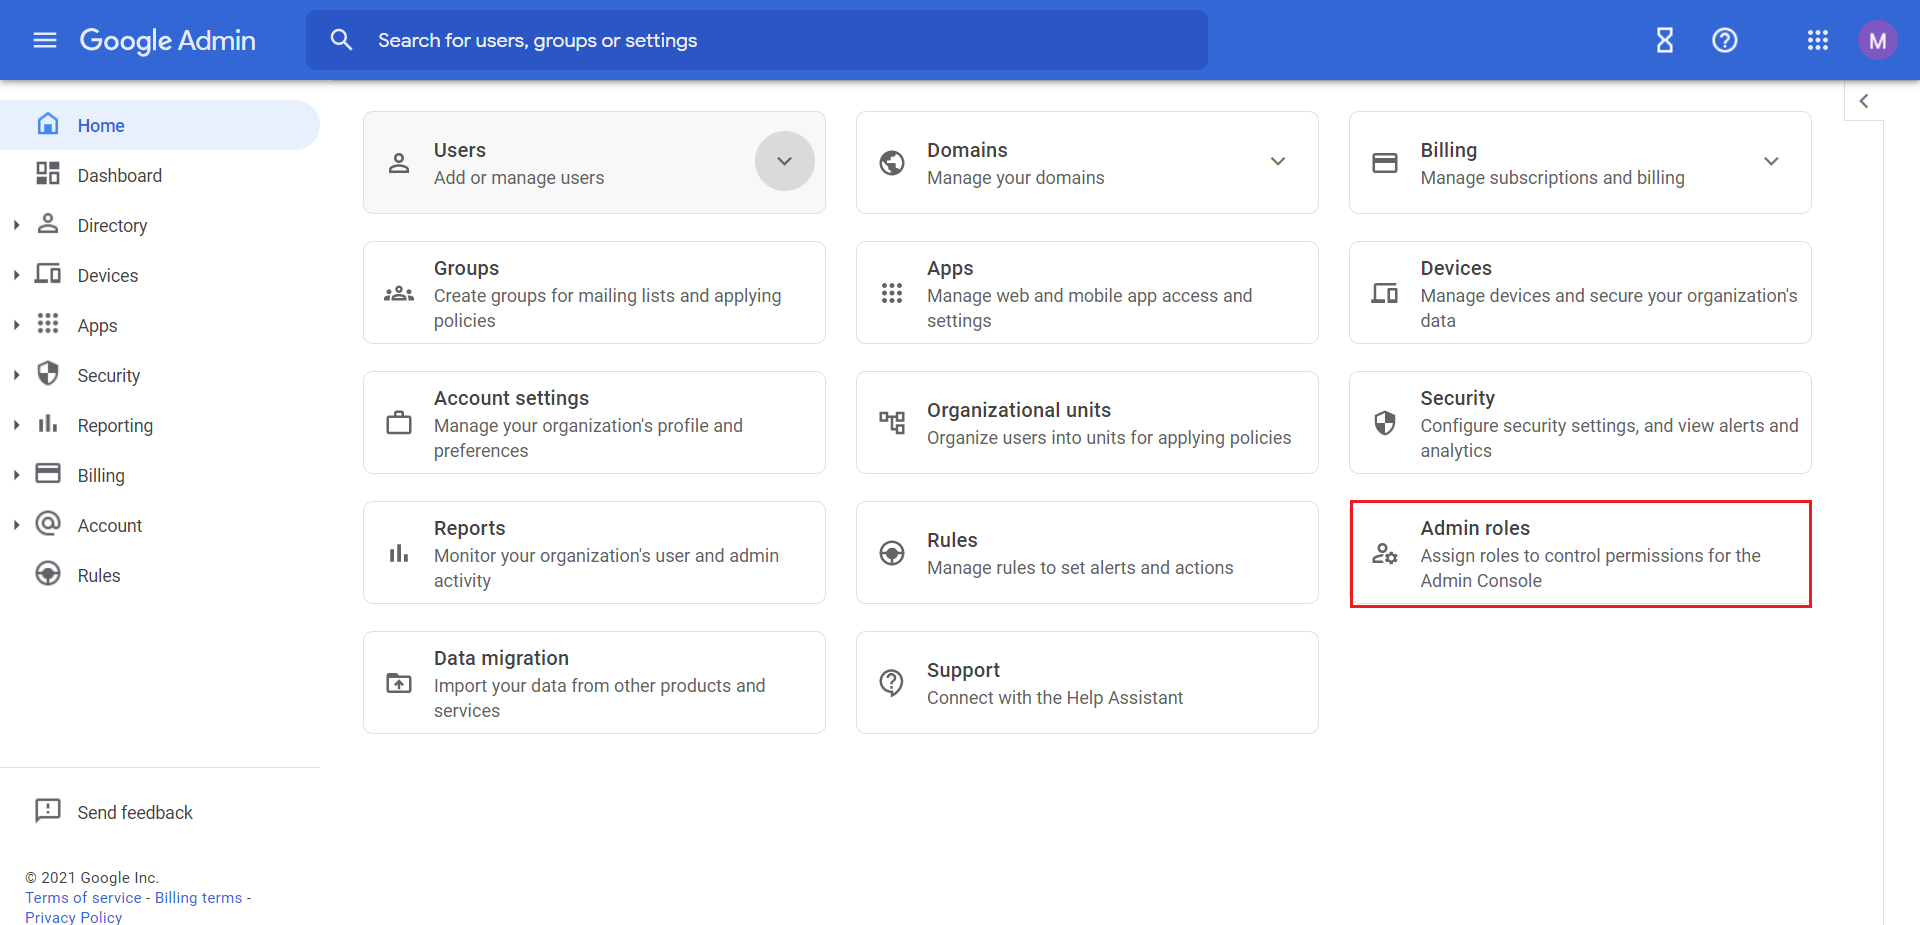 How to migrate data from Office 365 to G Suite | TechRepublic